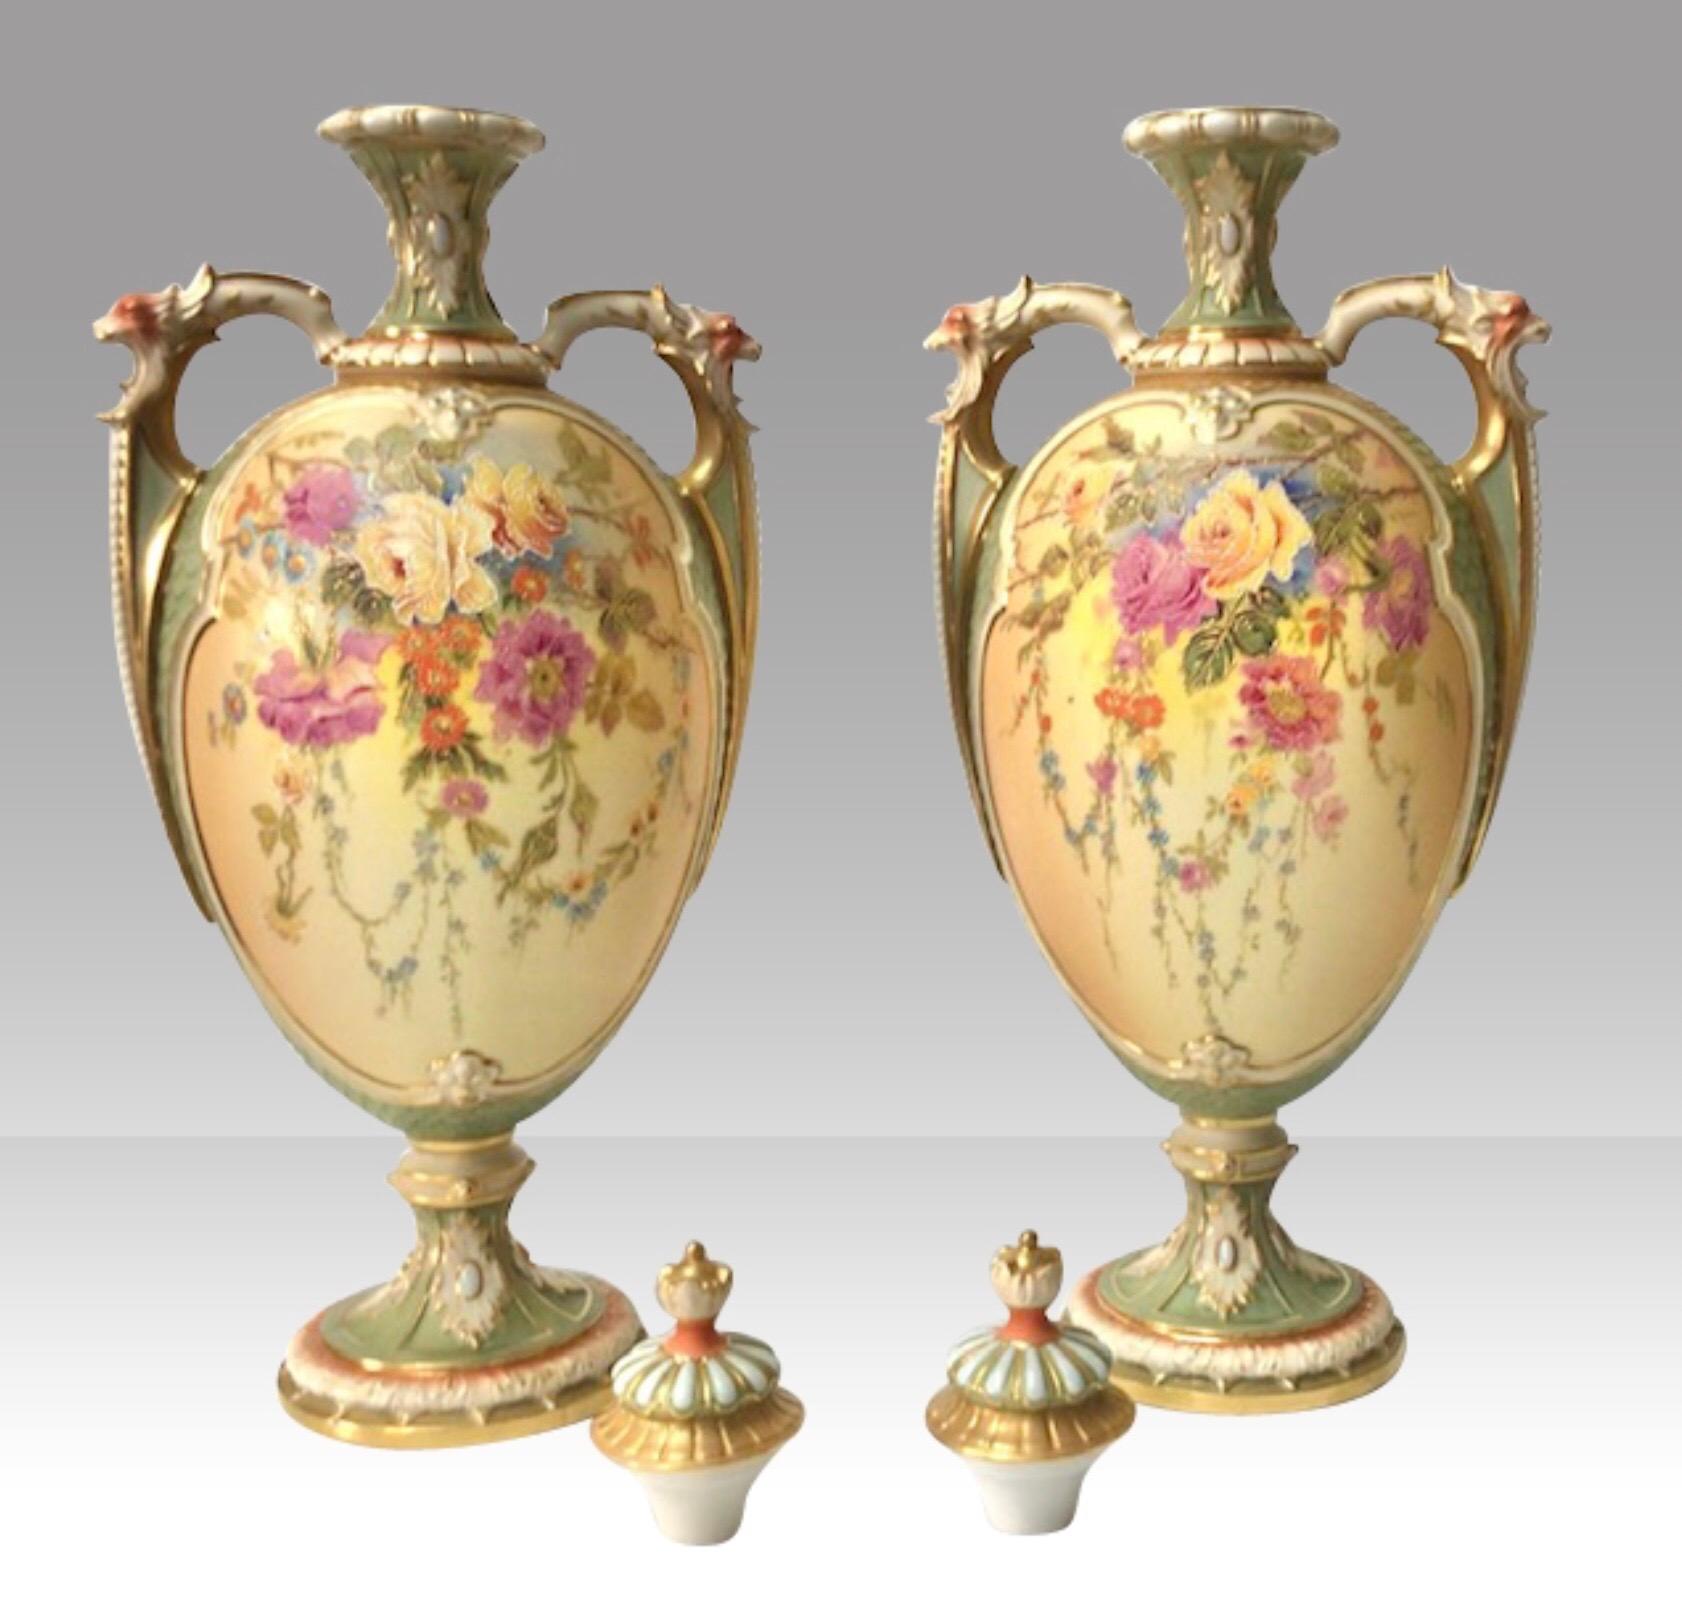 Pair of Large Antique Blush & Turquoise Royal Worcester Vases & Covers by W Hale In Excellent Condition For Sale In Antrim, GB